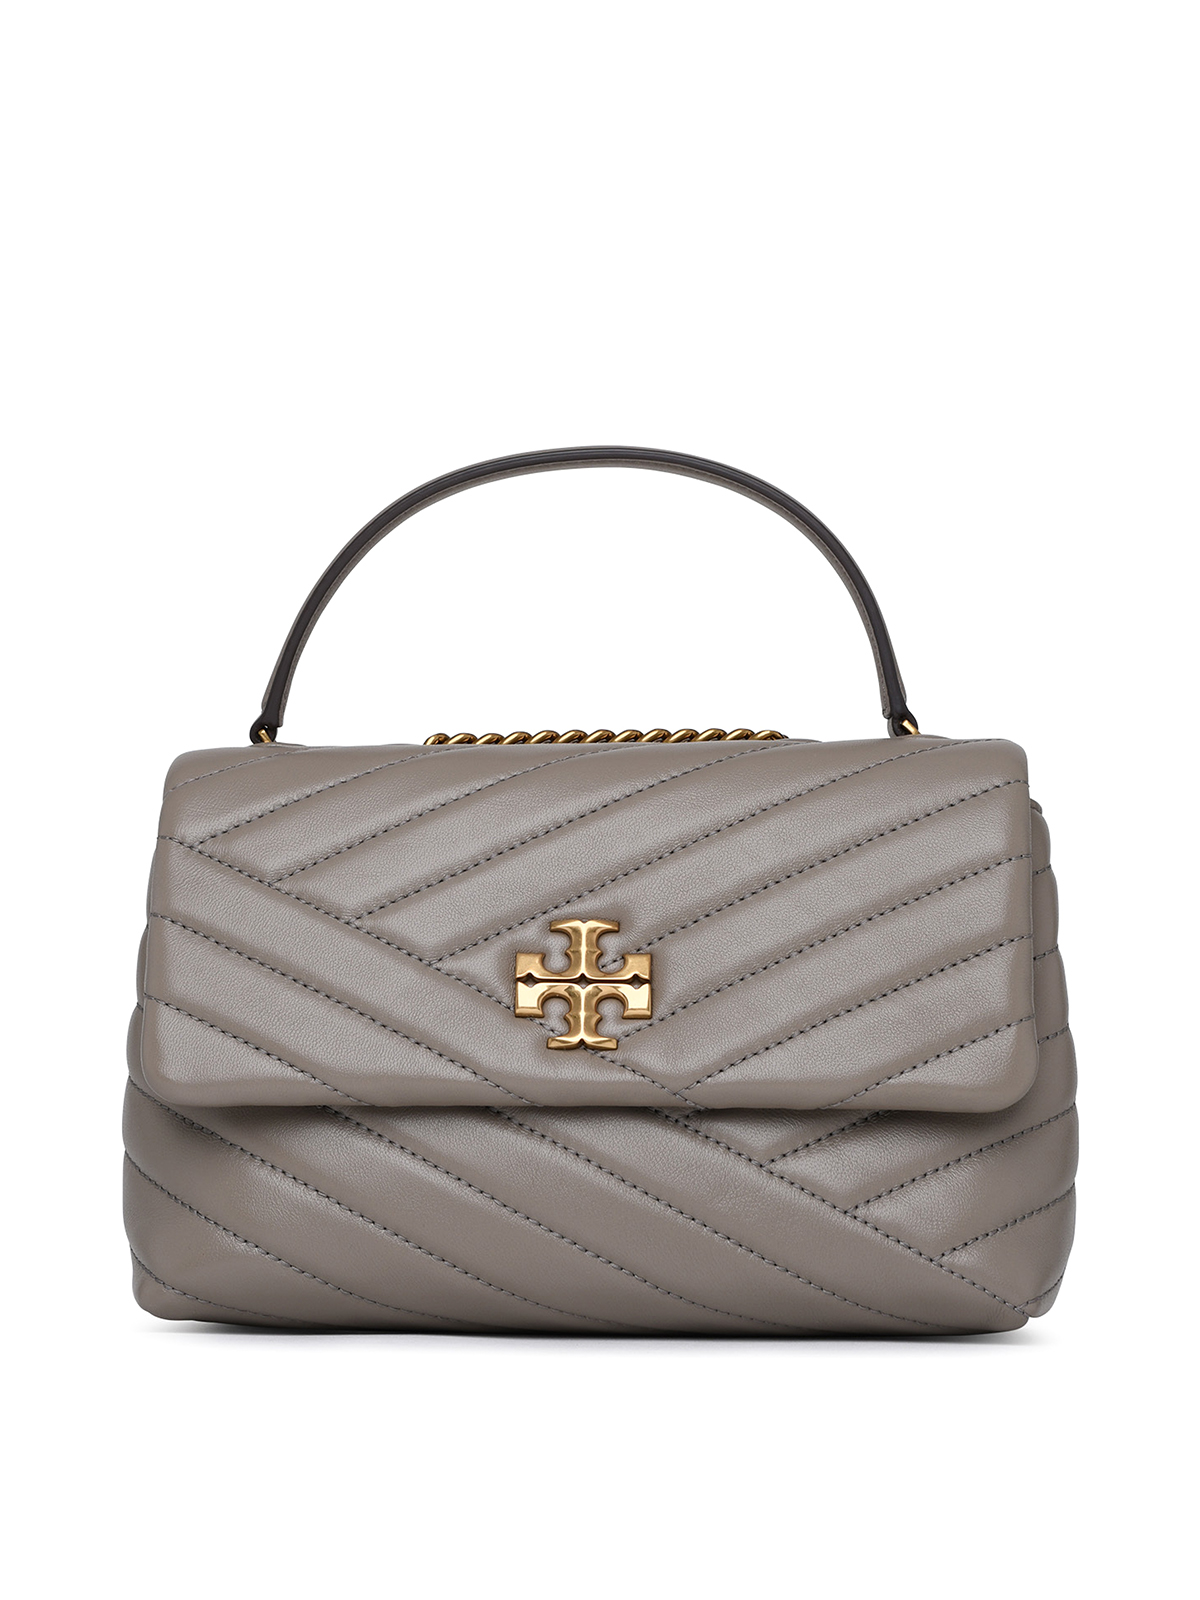 Tory Burch Small Kira Bag In Gray Leather In Beige